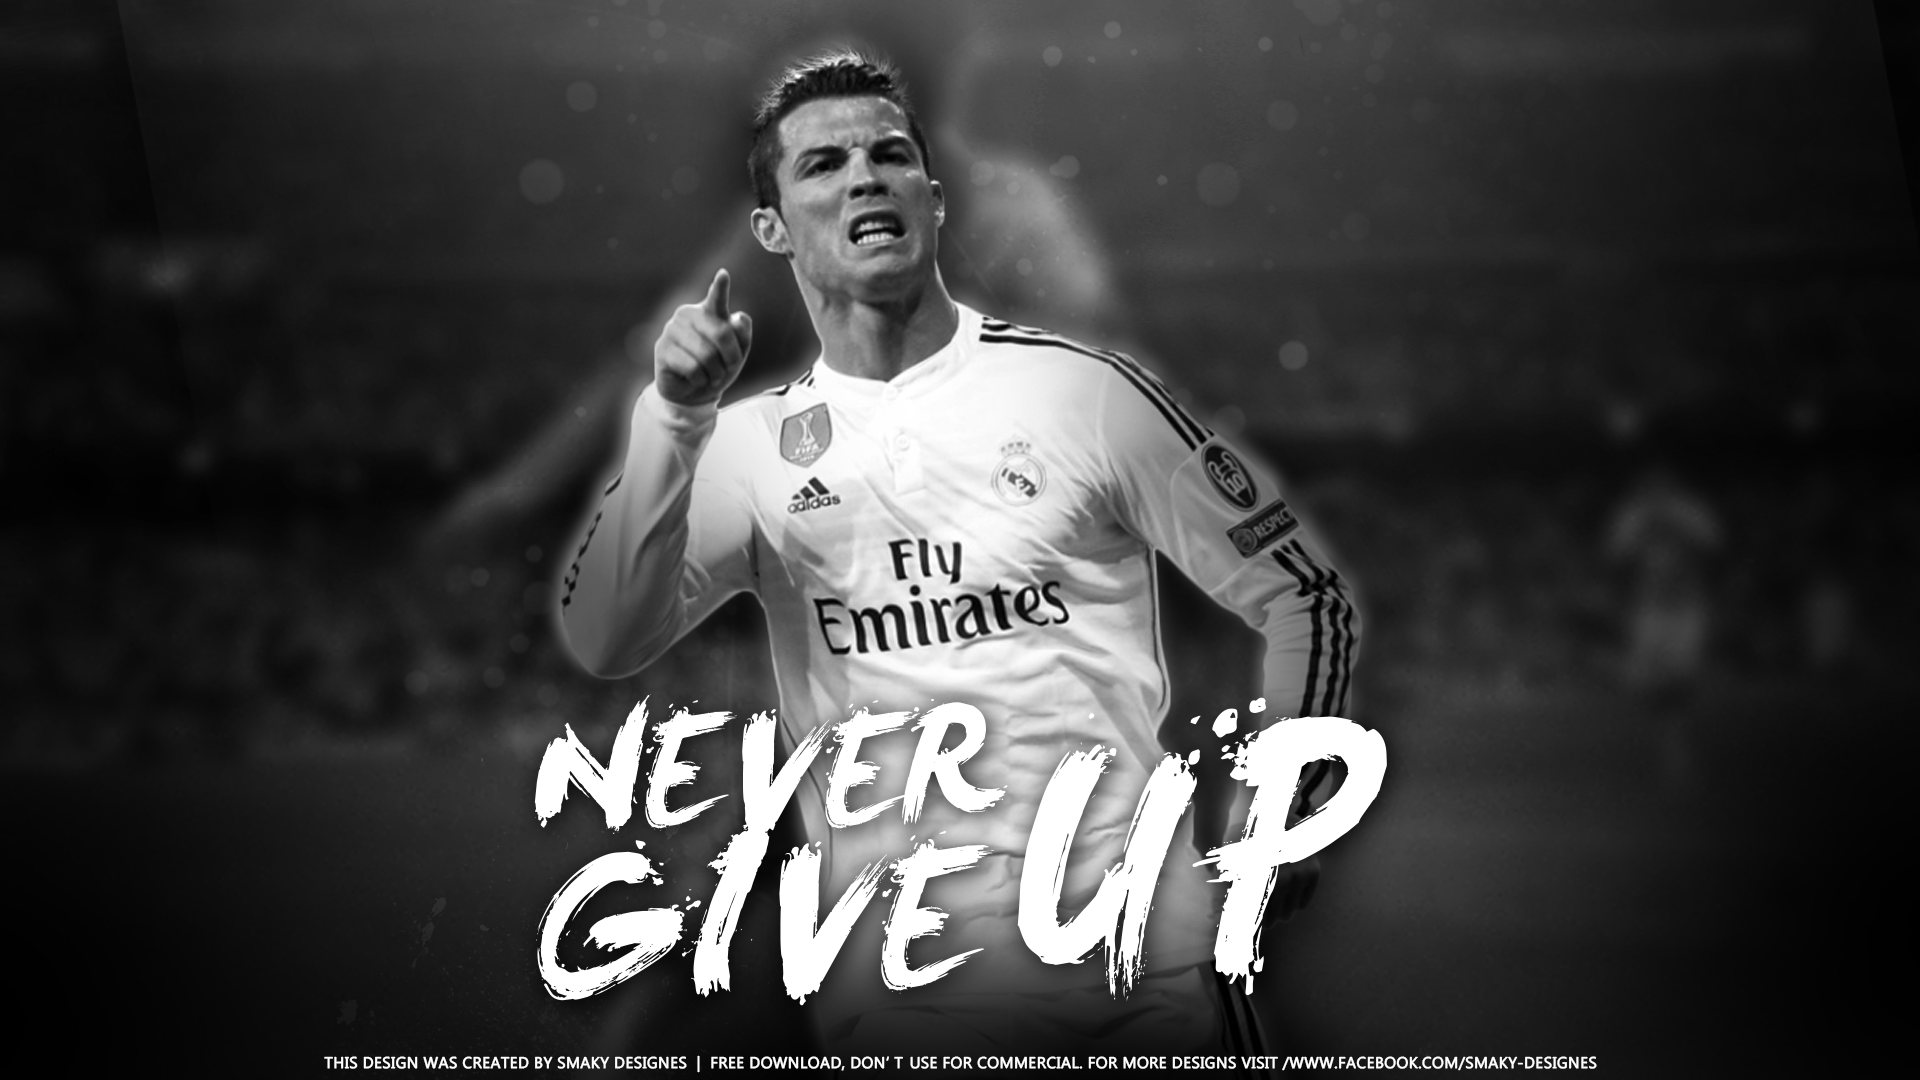 cr7 wallpaper download,font,poster,photography,black and white,flash photography